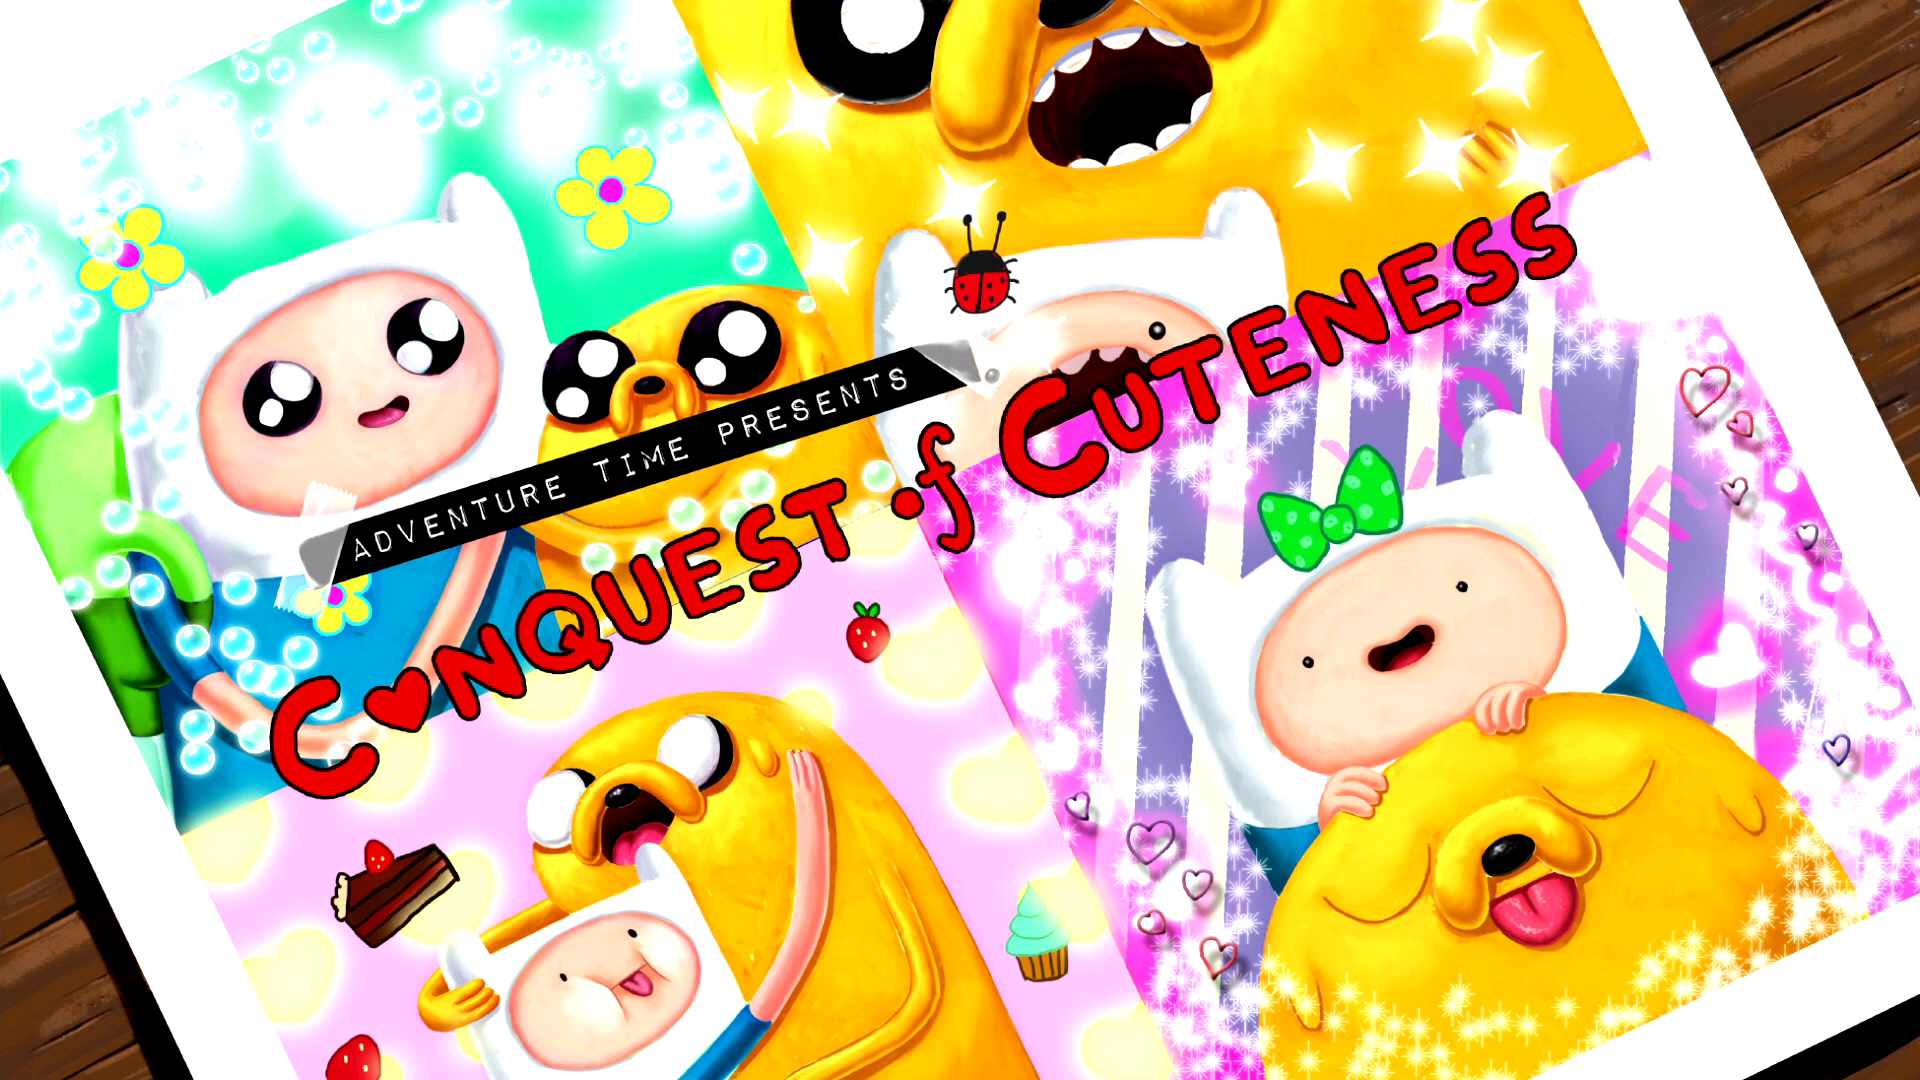 Conquest of Cuteness | Adventure Time Wiki | FANDOM powered by Wikia